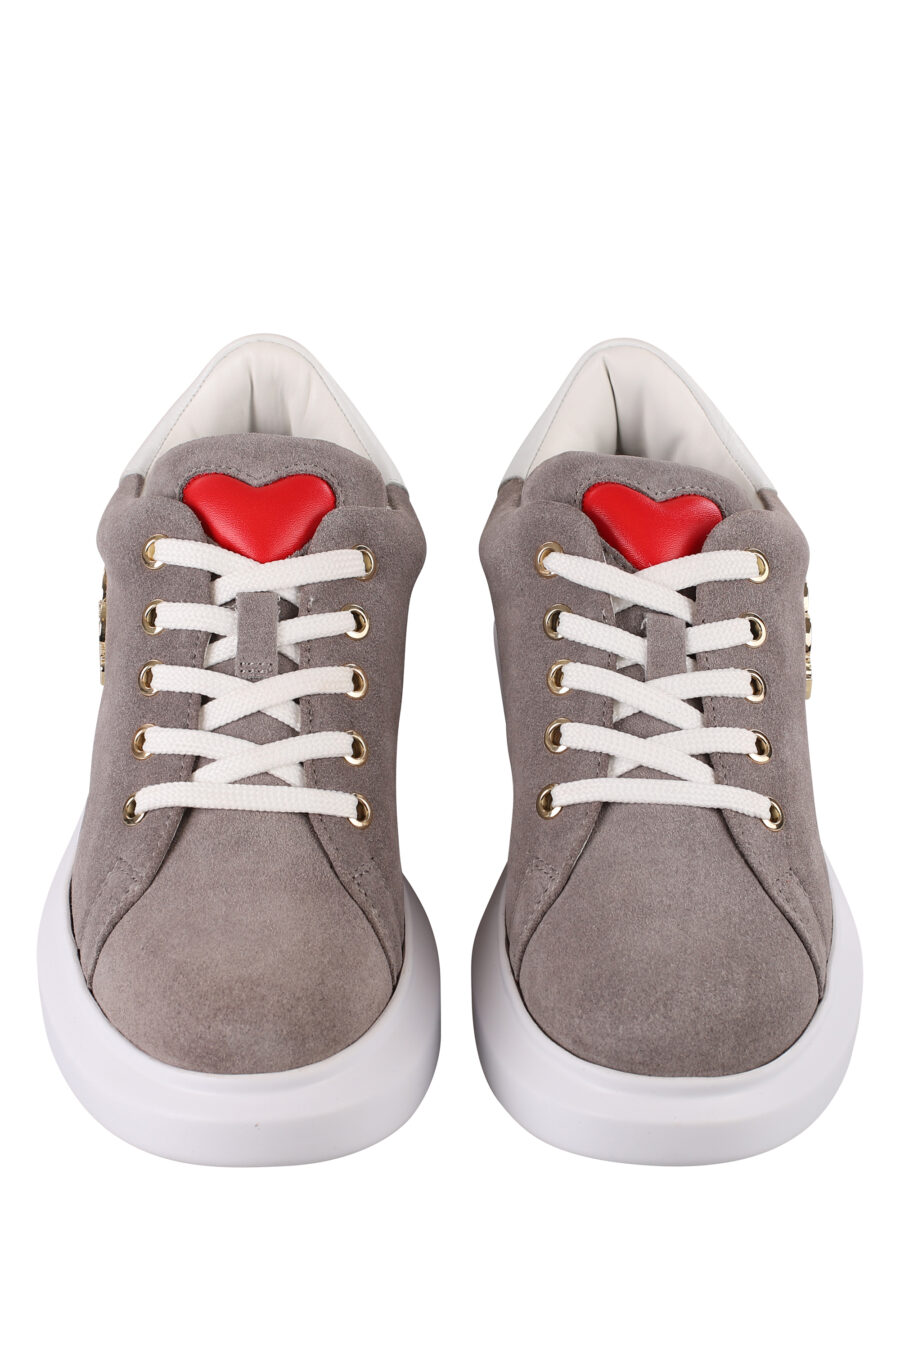 Grey trainers with gold metal logo and white sole - IMG 1226